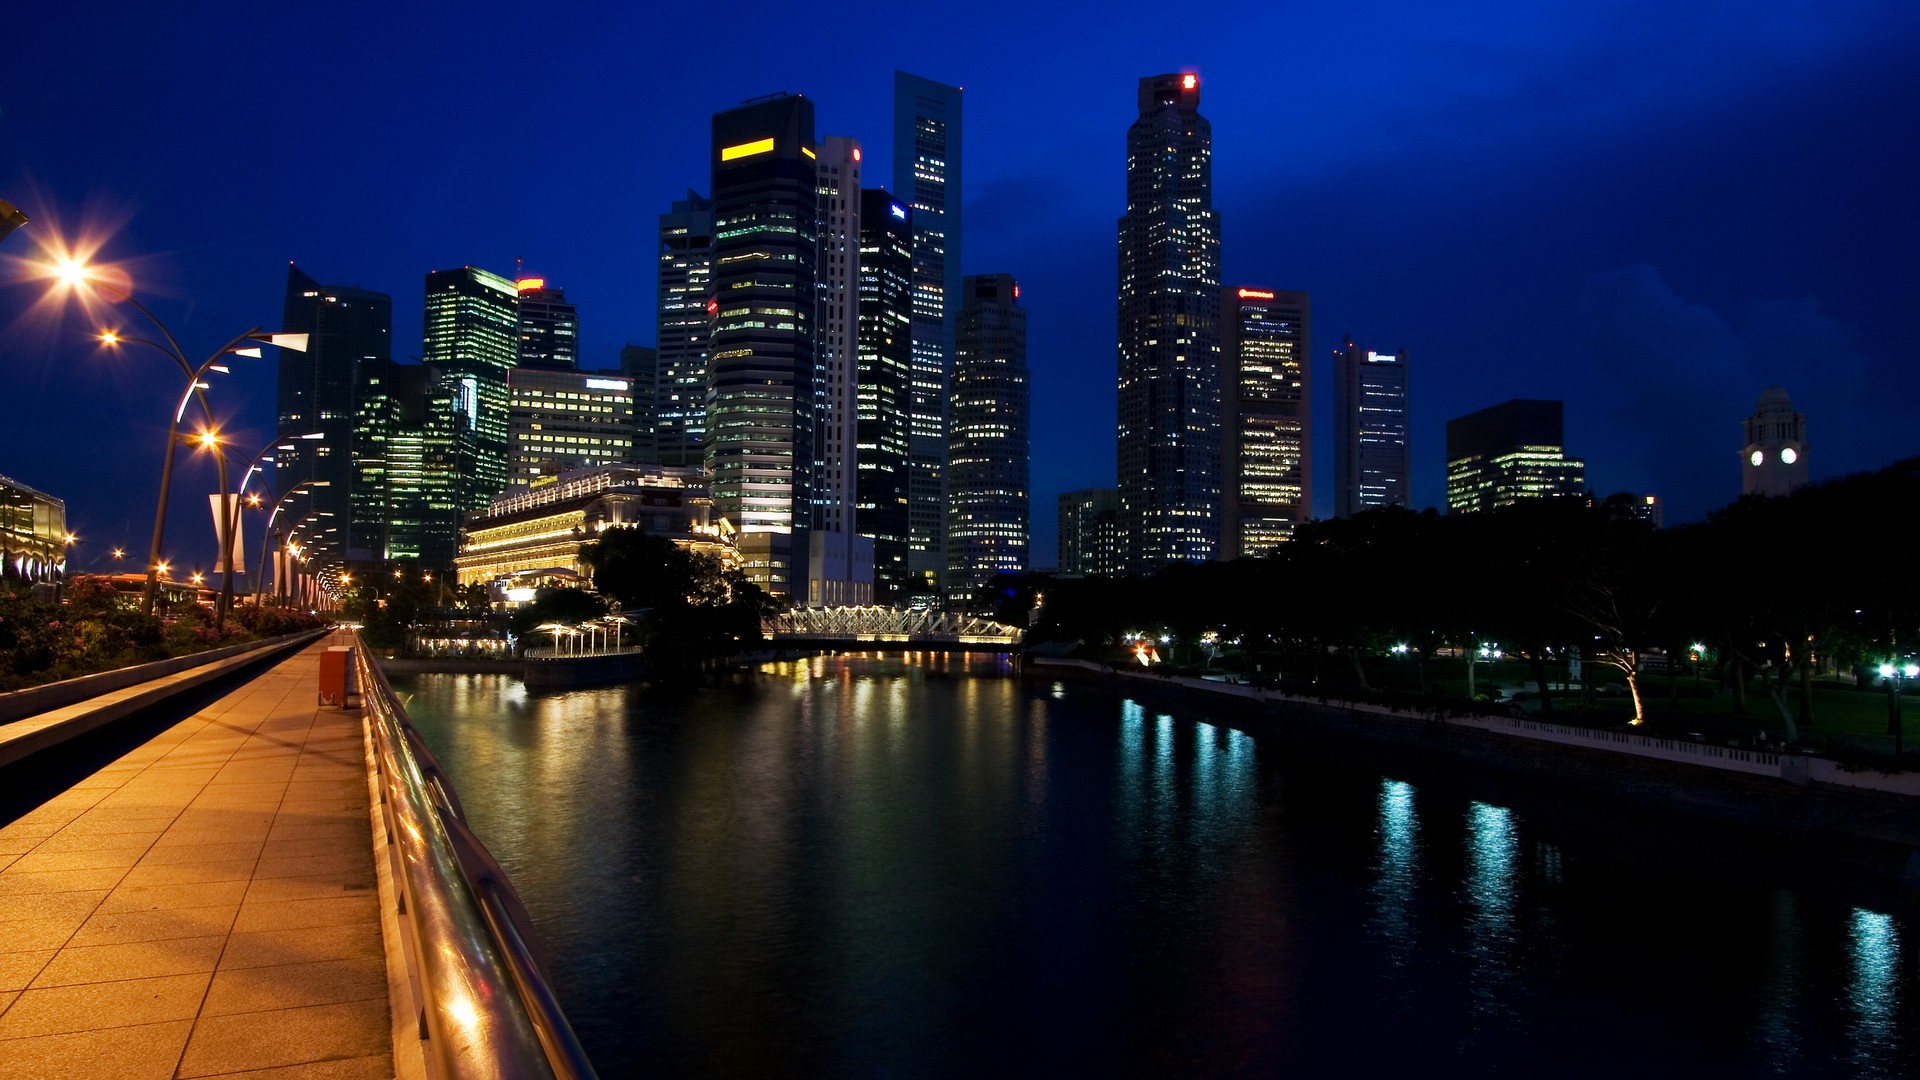 cityscapes, Architecture, Town, Skyscrapers, Rivers, Night, City Wallpaper